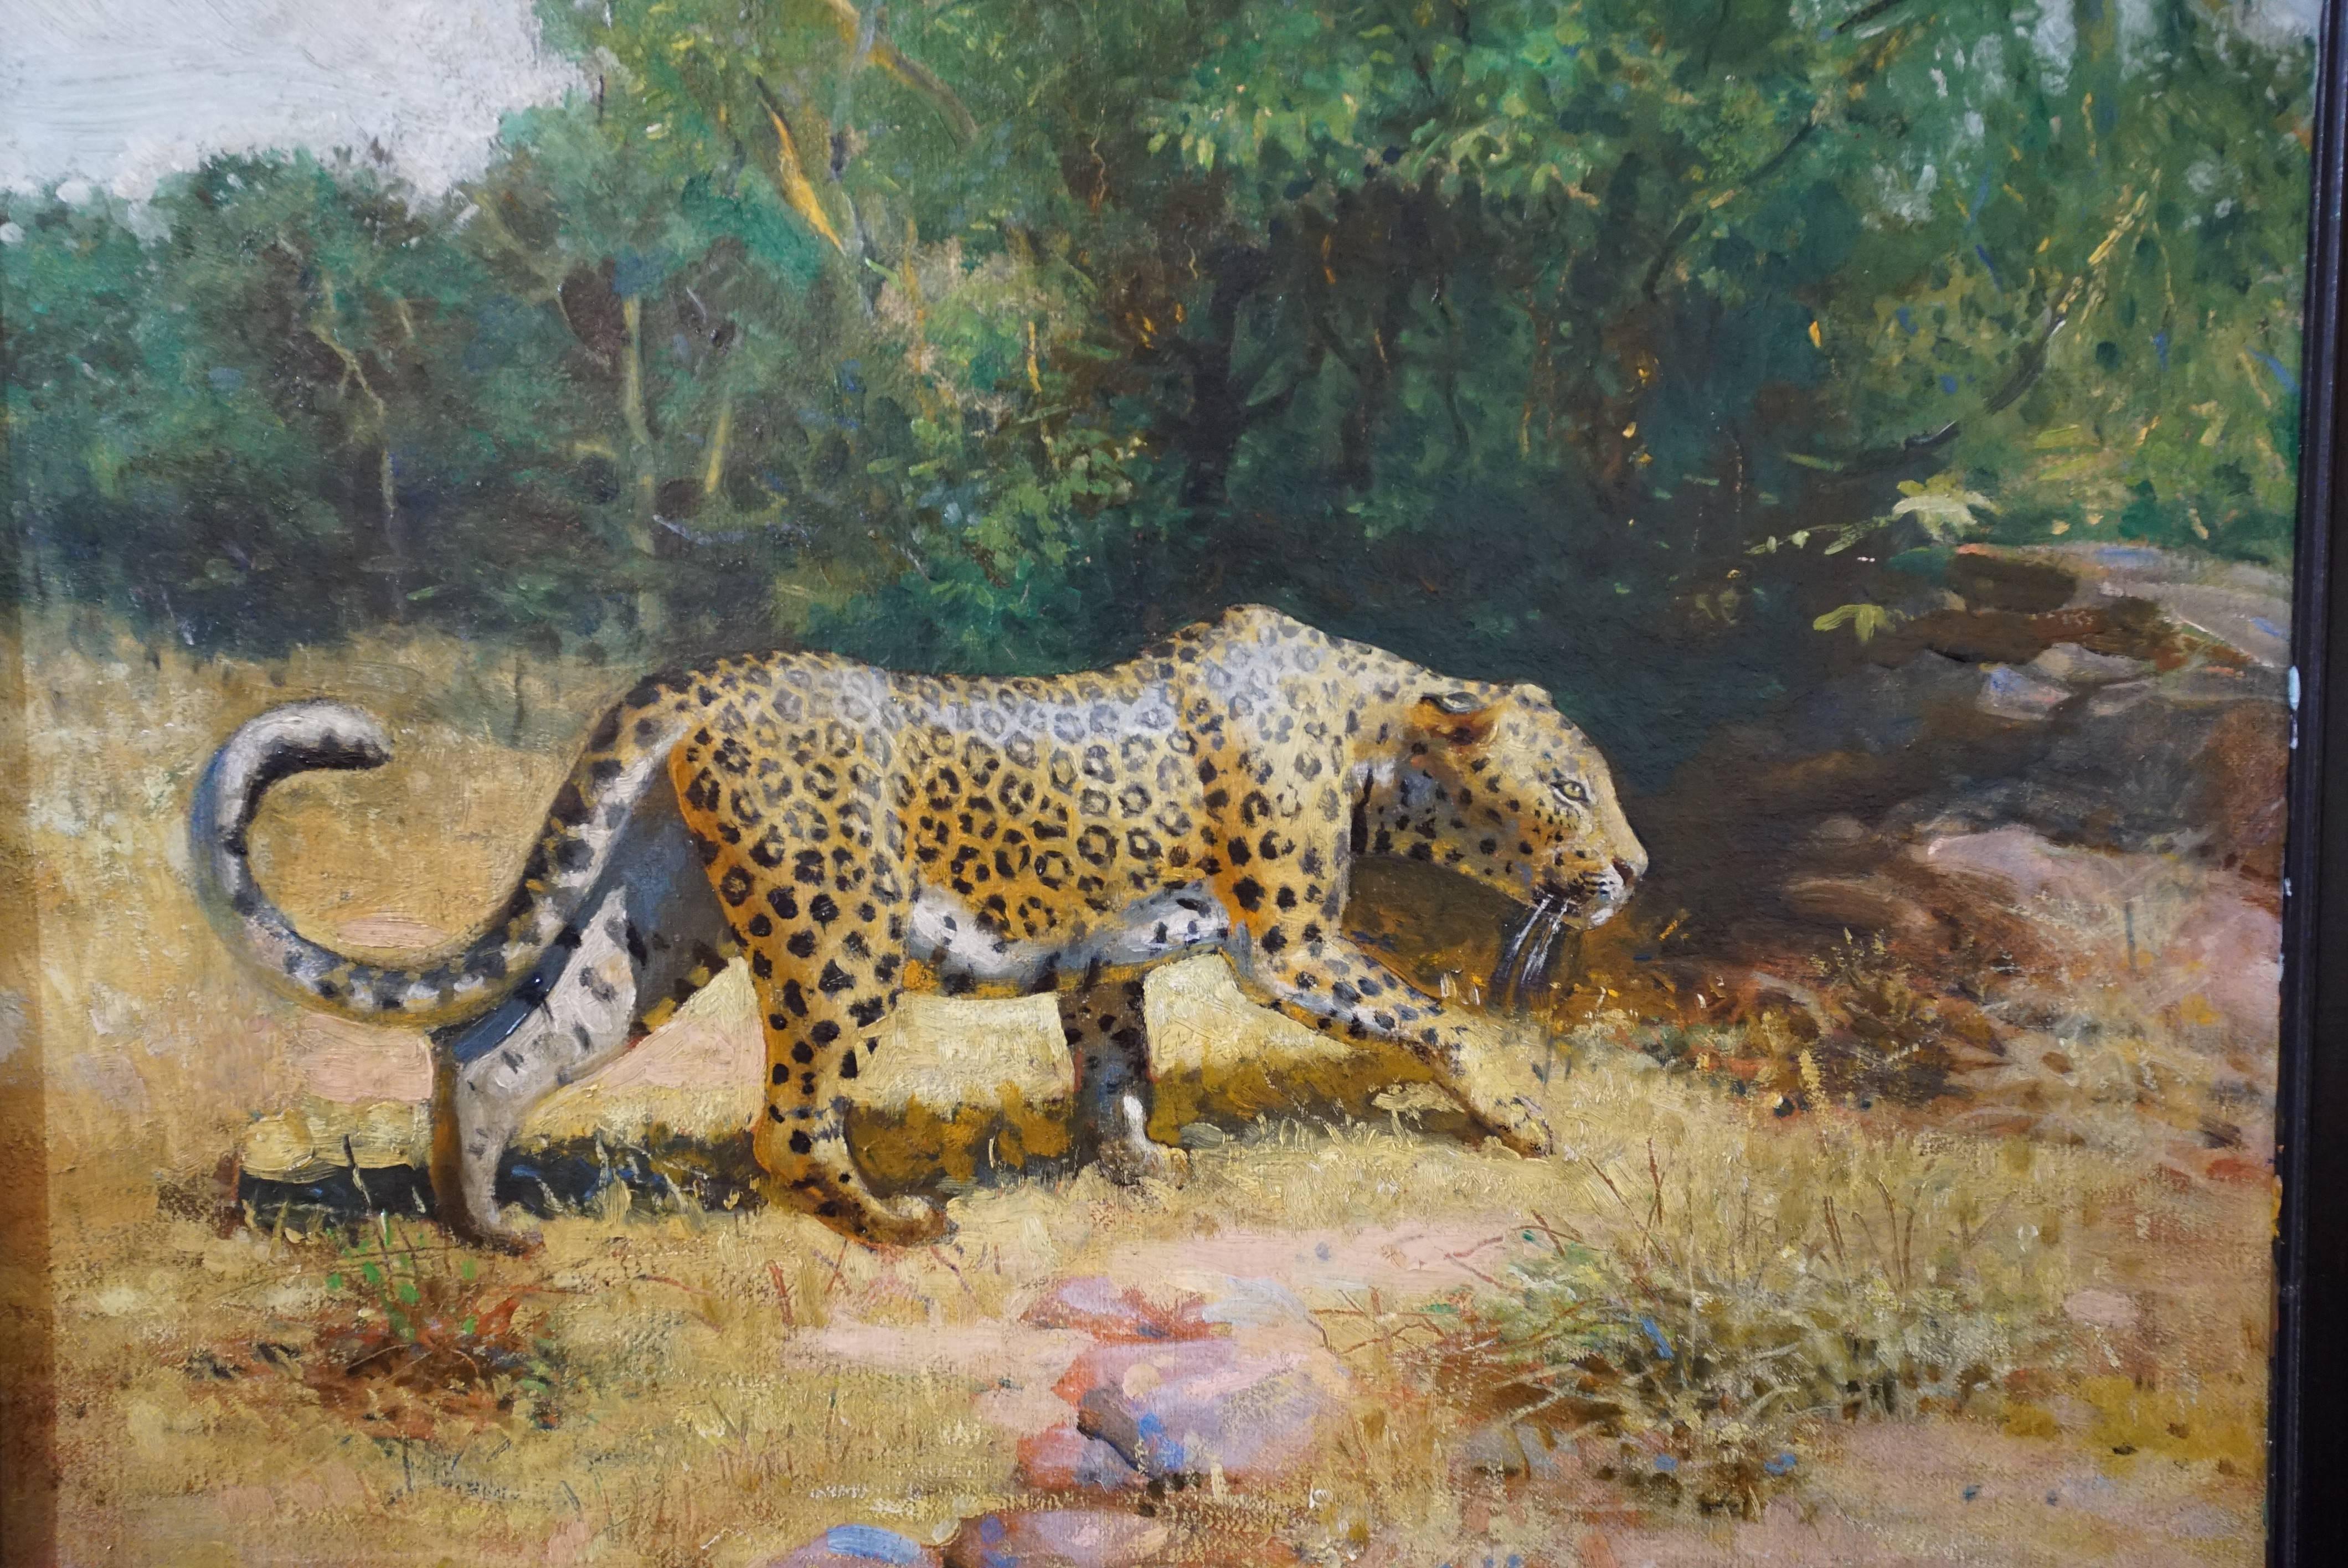 An oil on canvas of a leopard on the prowl. 

Bottom left - G.H. from J.T.C. Jr
Bottom right - 1926

The stretcher stamped 